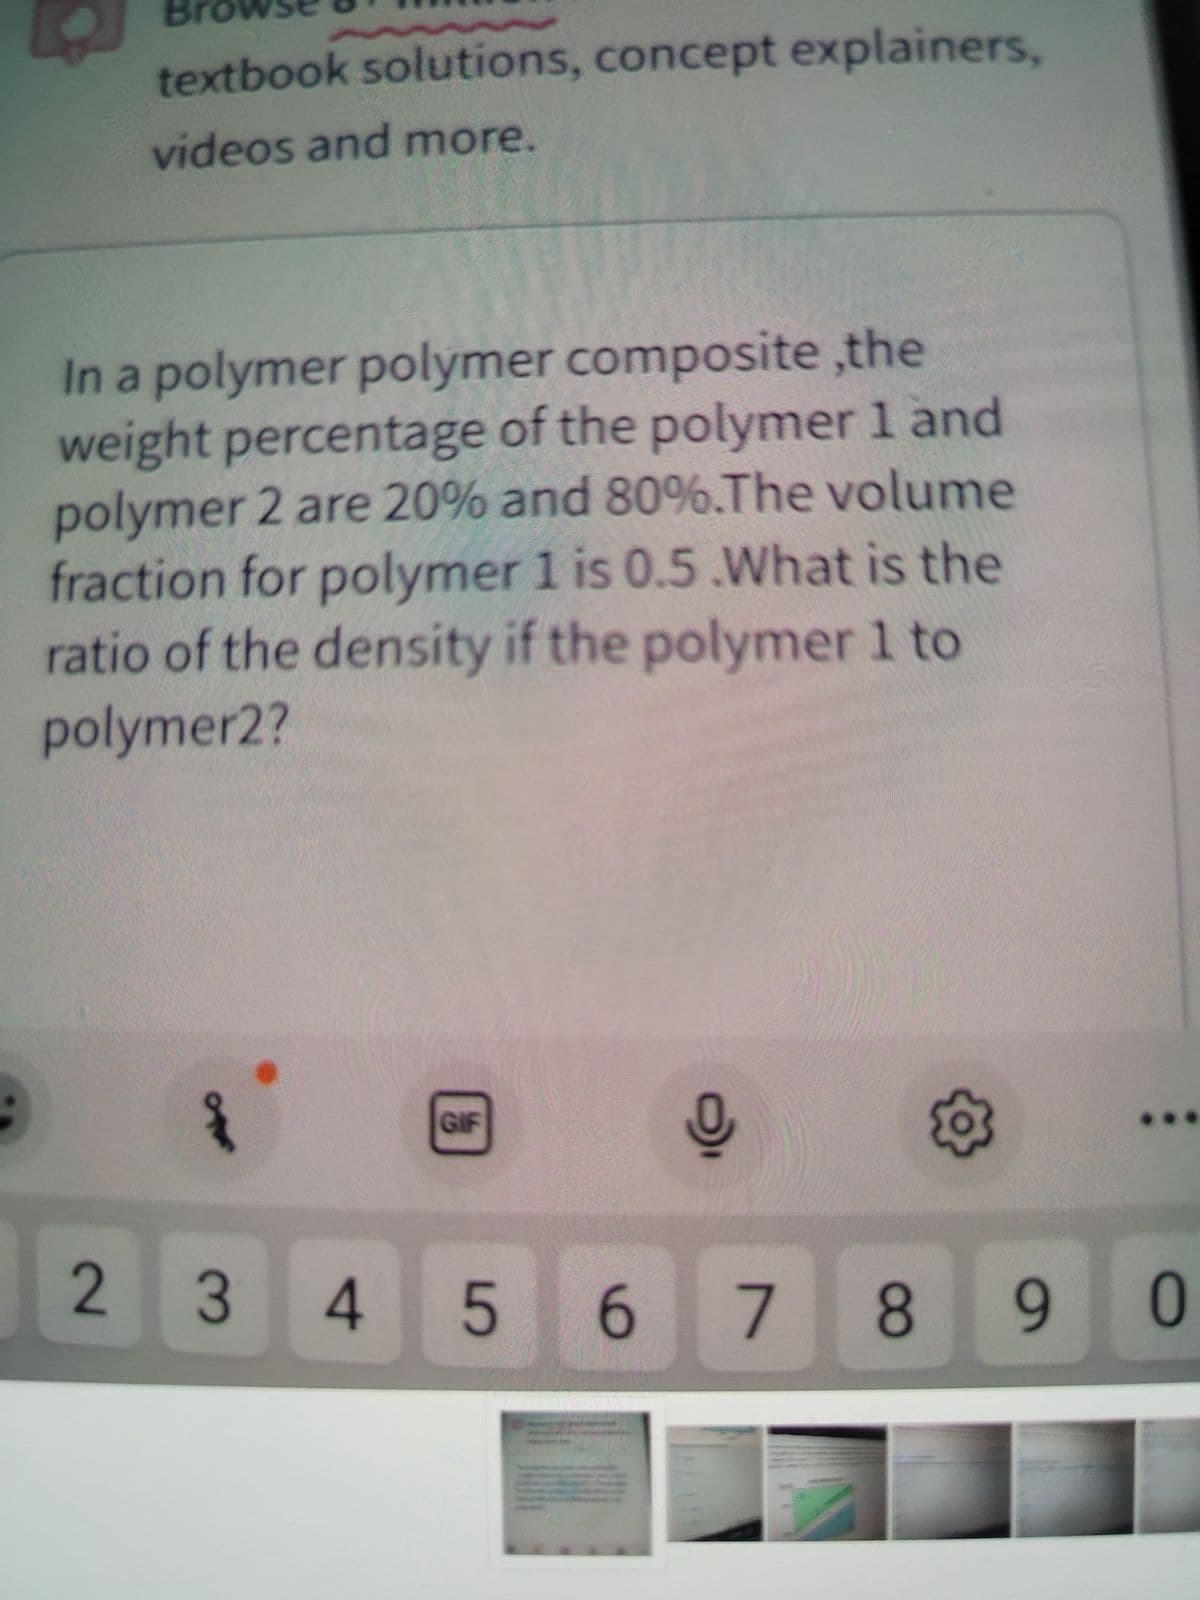 textbook solutions, concept explainers,
videos and more.
In a polymer polymer composite,the
weight percentage of the polymer 1 and
polymer 2 are 20% and 80%.The volume
fraction for polymer 1 is 0.5 .What is the
ratio of the density if the polymer 1 to
polymer2?
2
Ofer
GIF
0
O
345 6 7 8 9
0